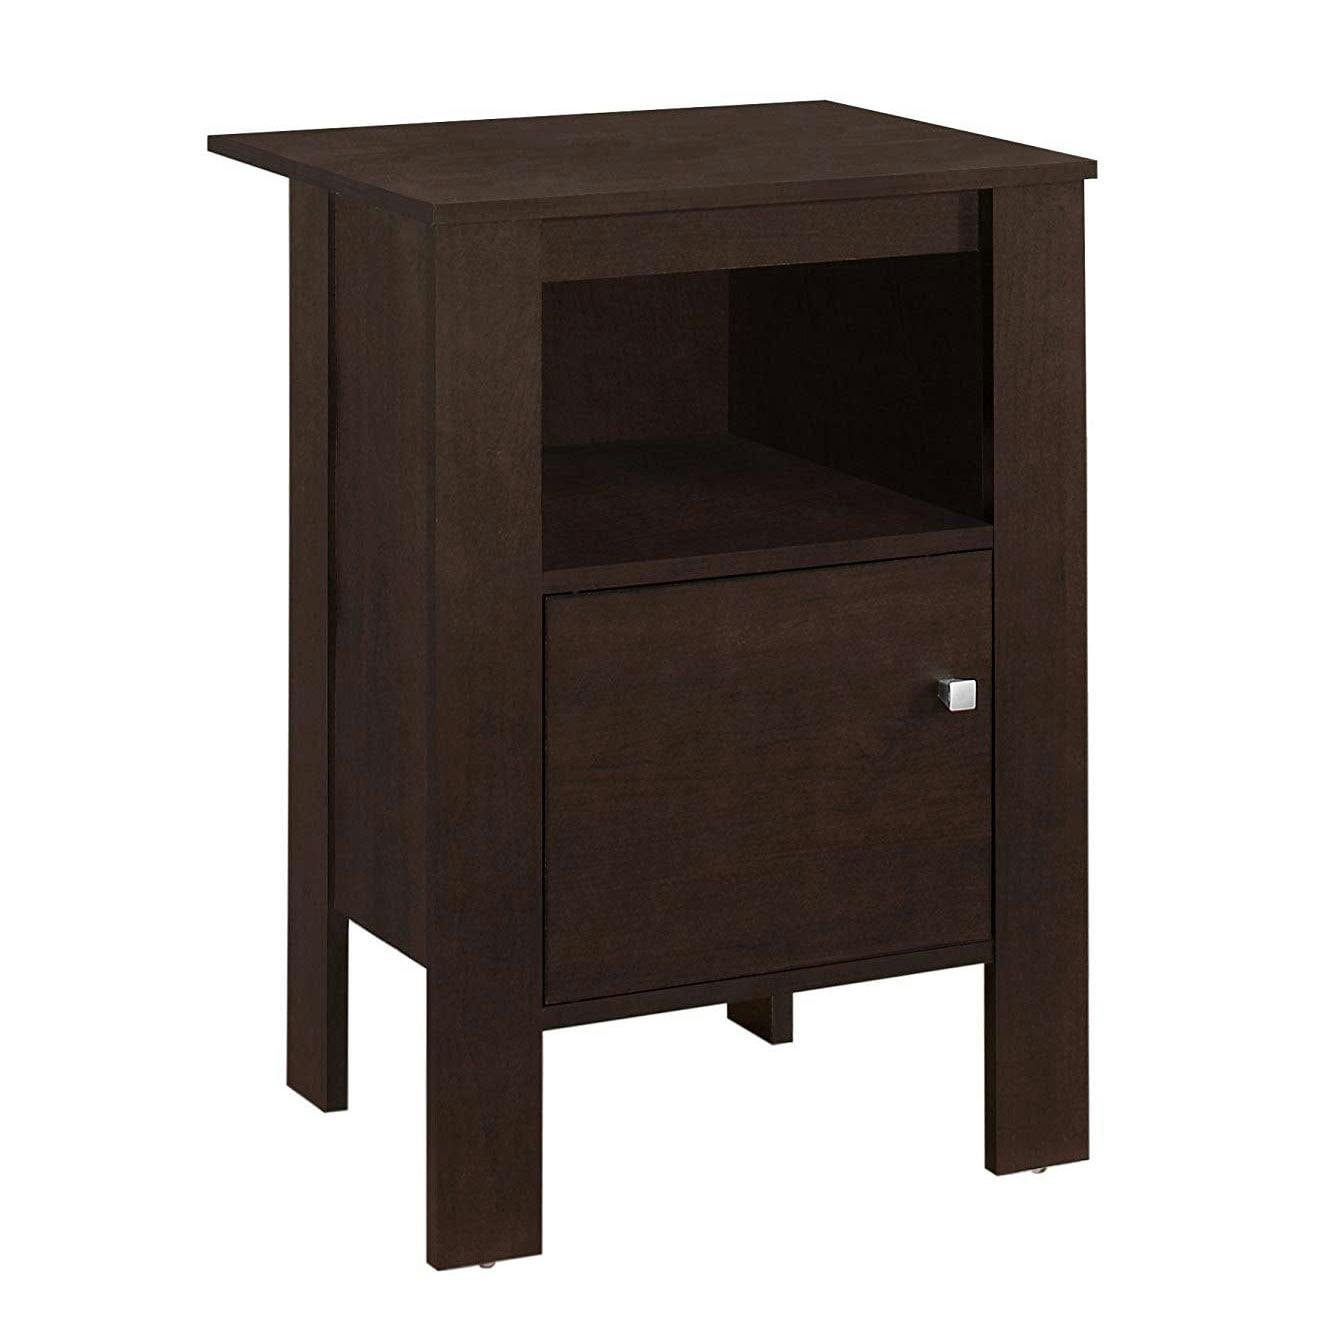 Espresso Contemporary Rectangular Accent Table with Storage